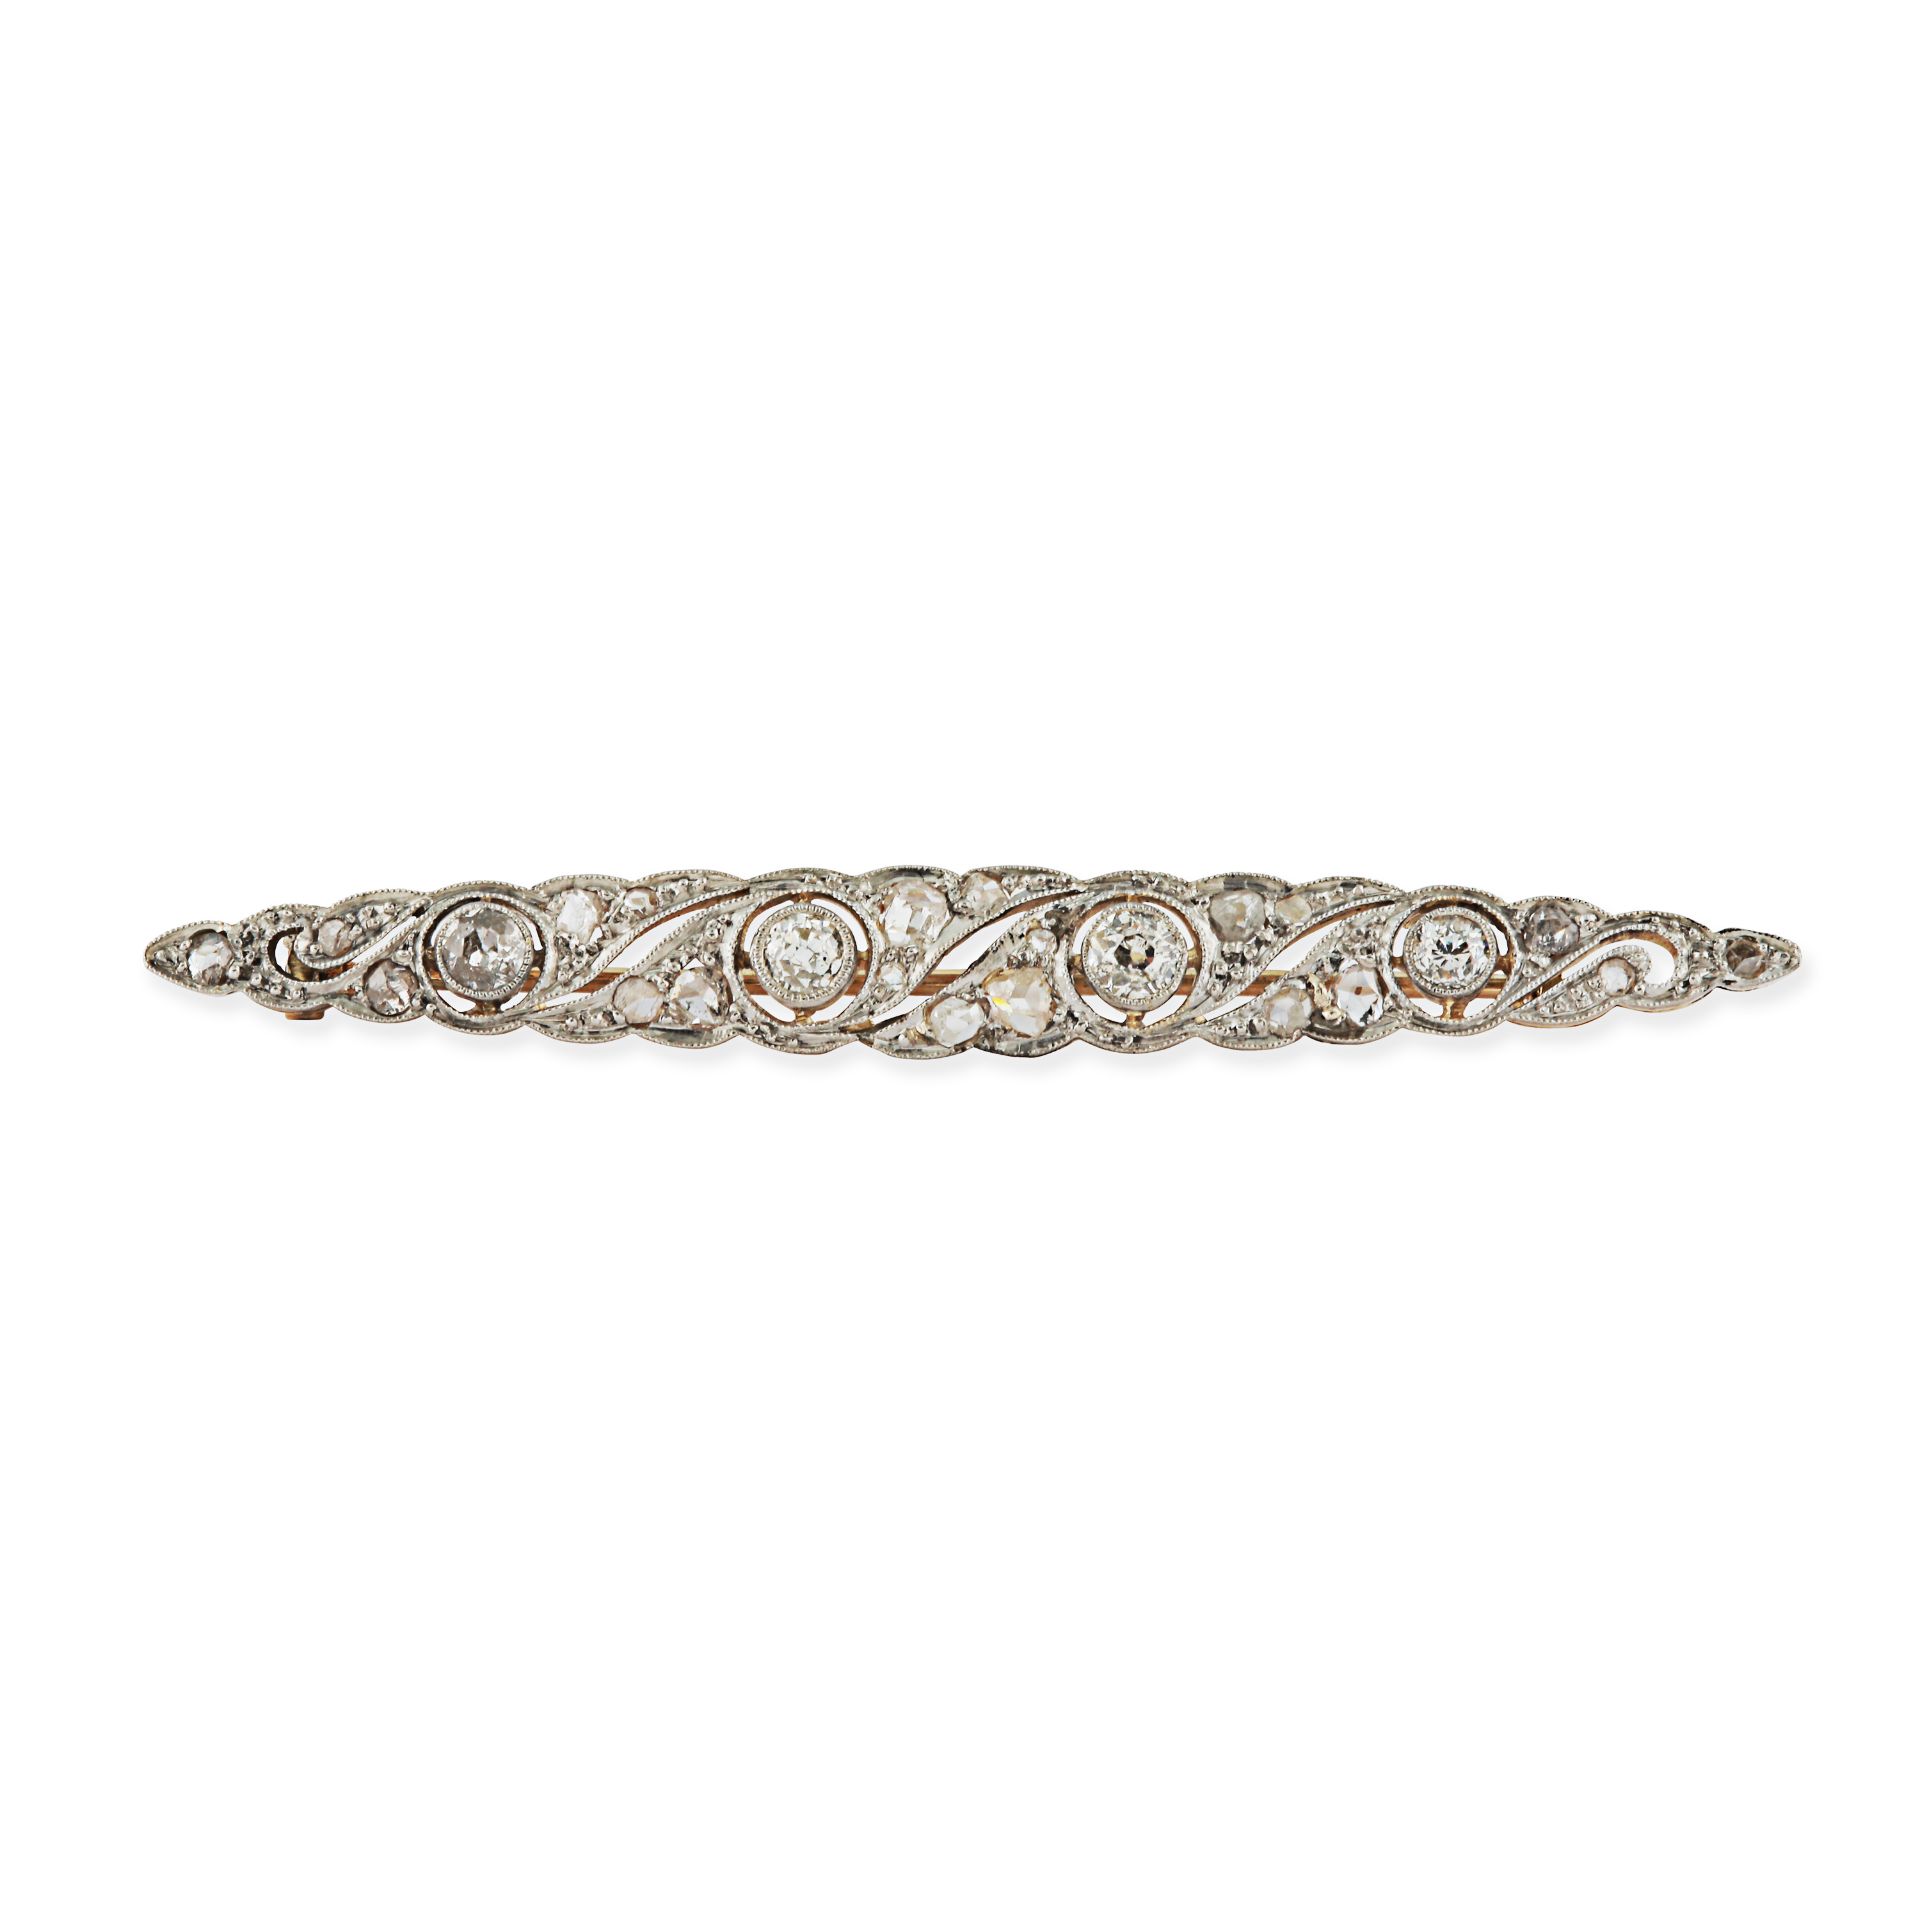 AN ANTIQUE DIAMOND BAR BROOCH in scrolling design, set throughout with old and rose cut diamonds,...